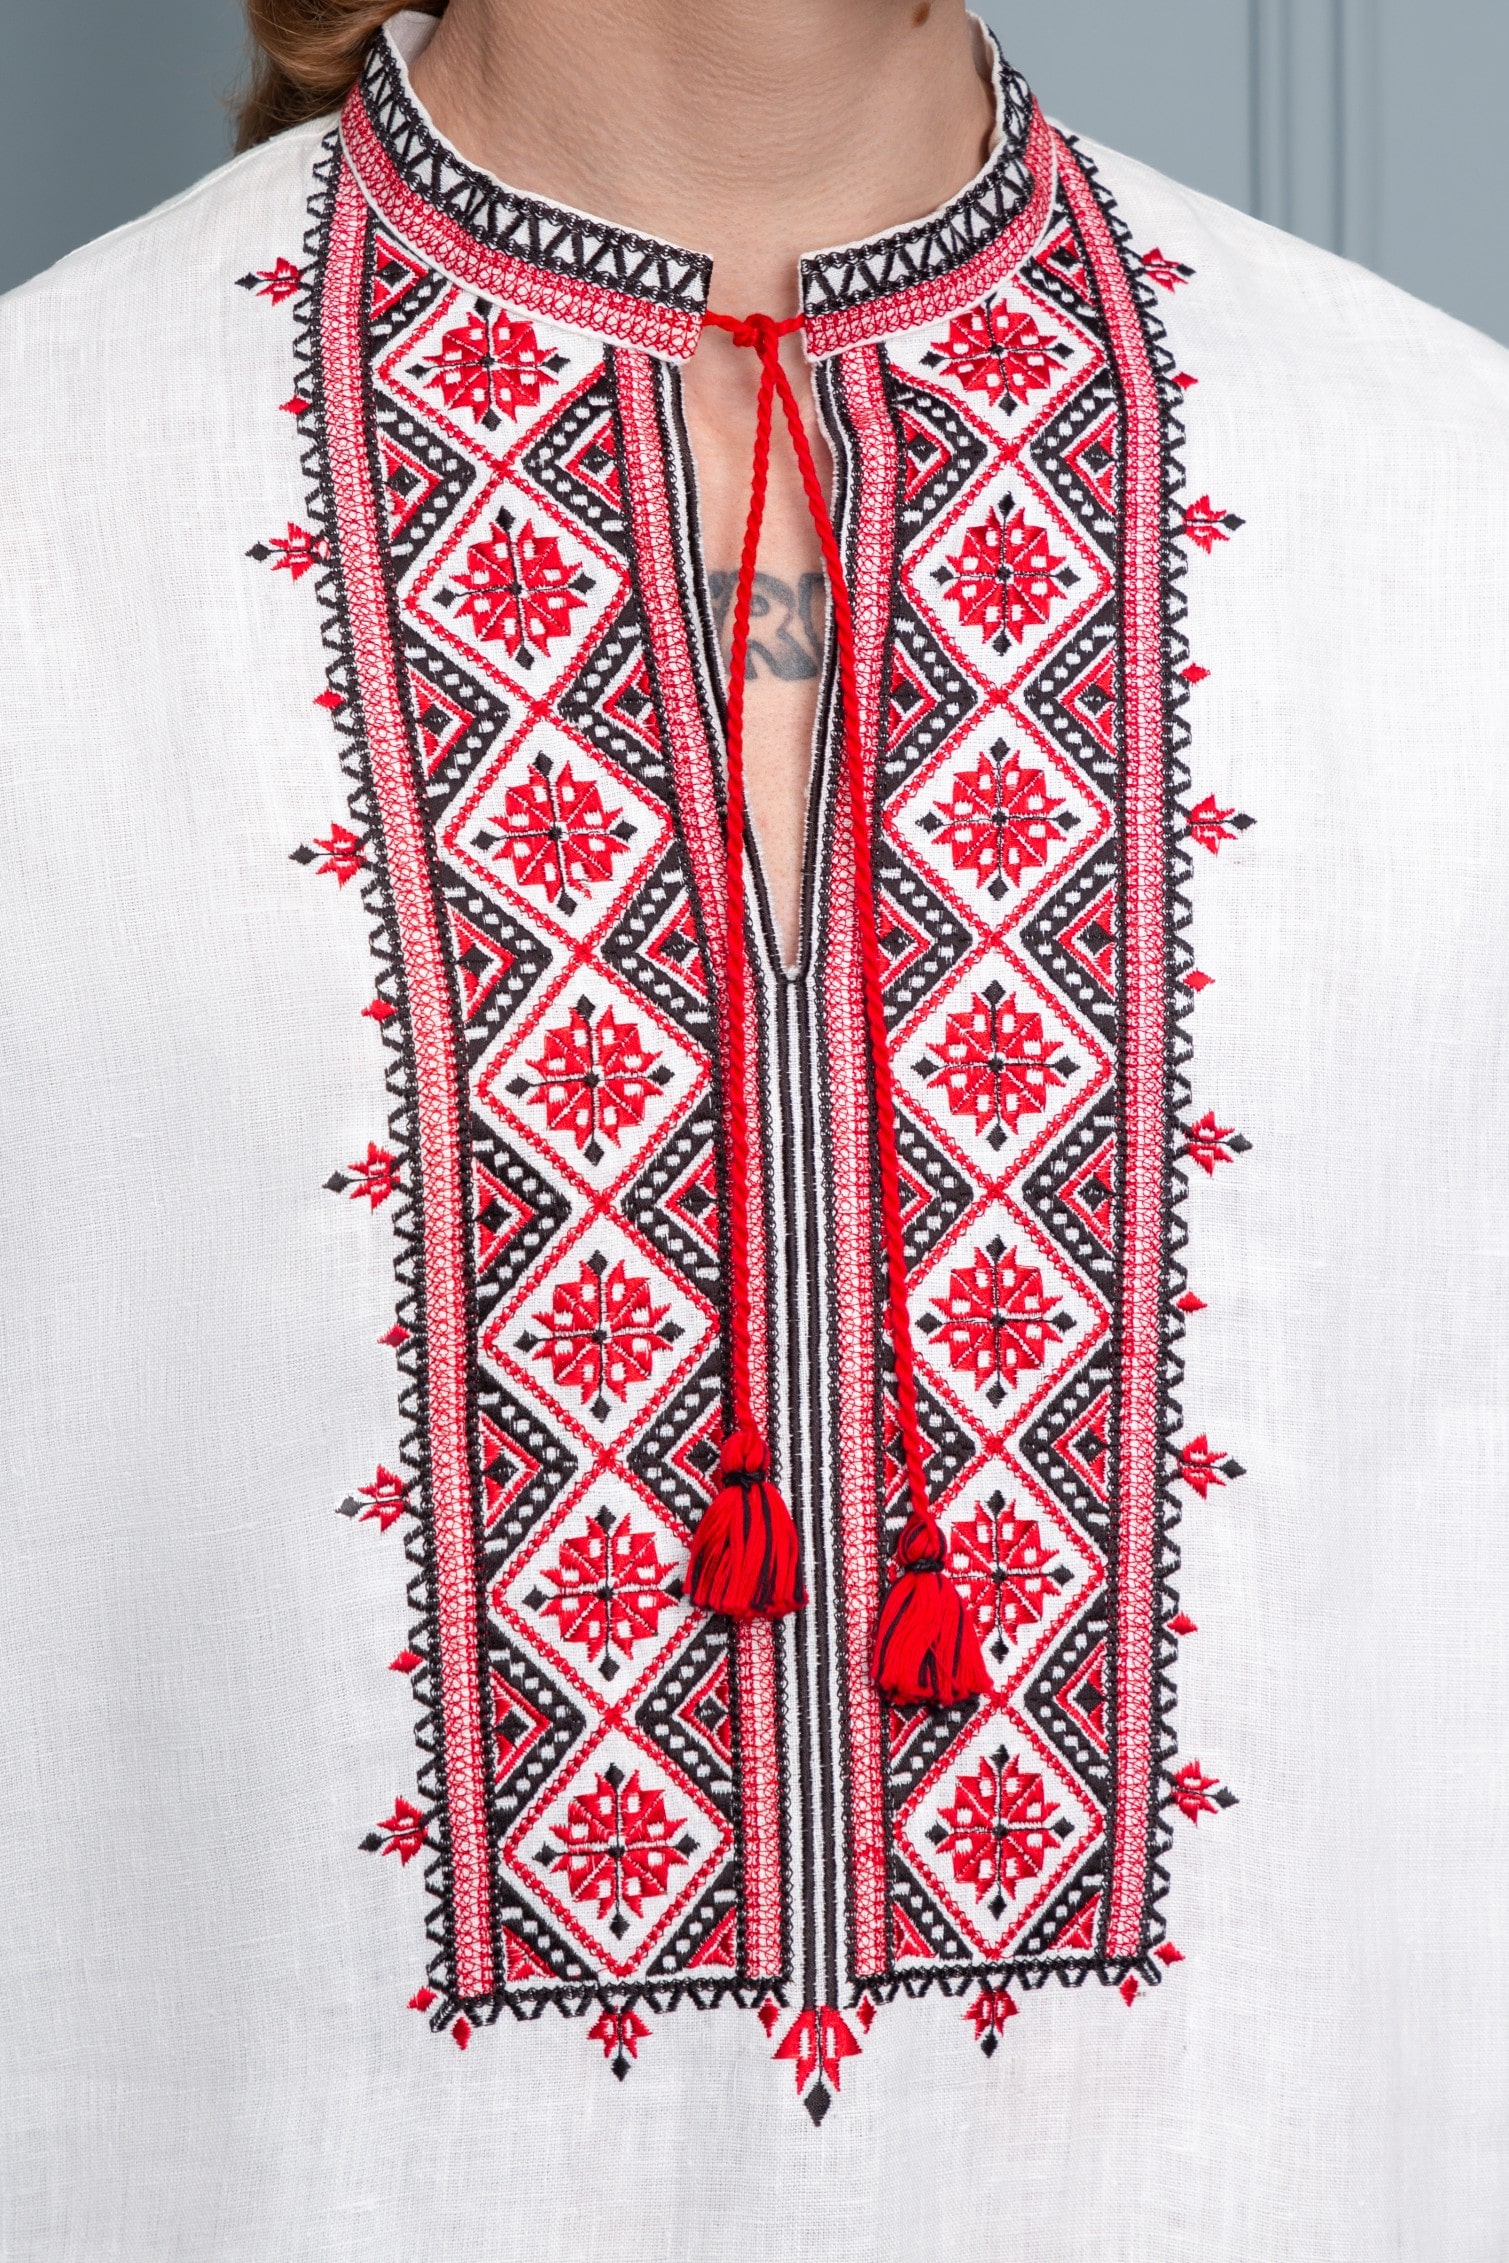 Embroidered shirt «Stars» (red and black)